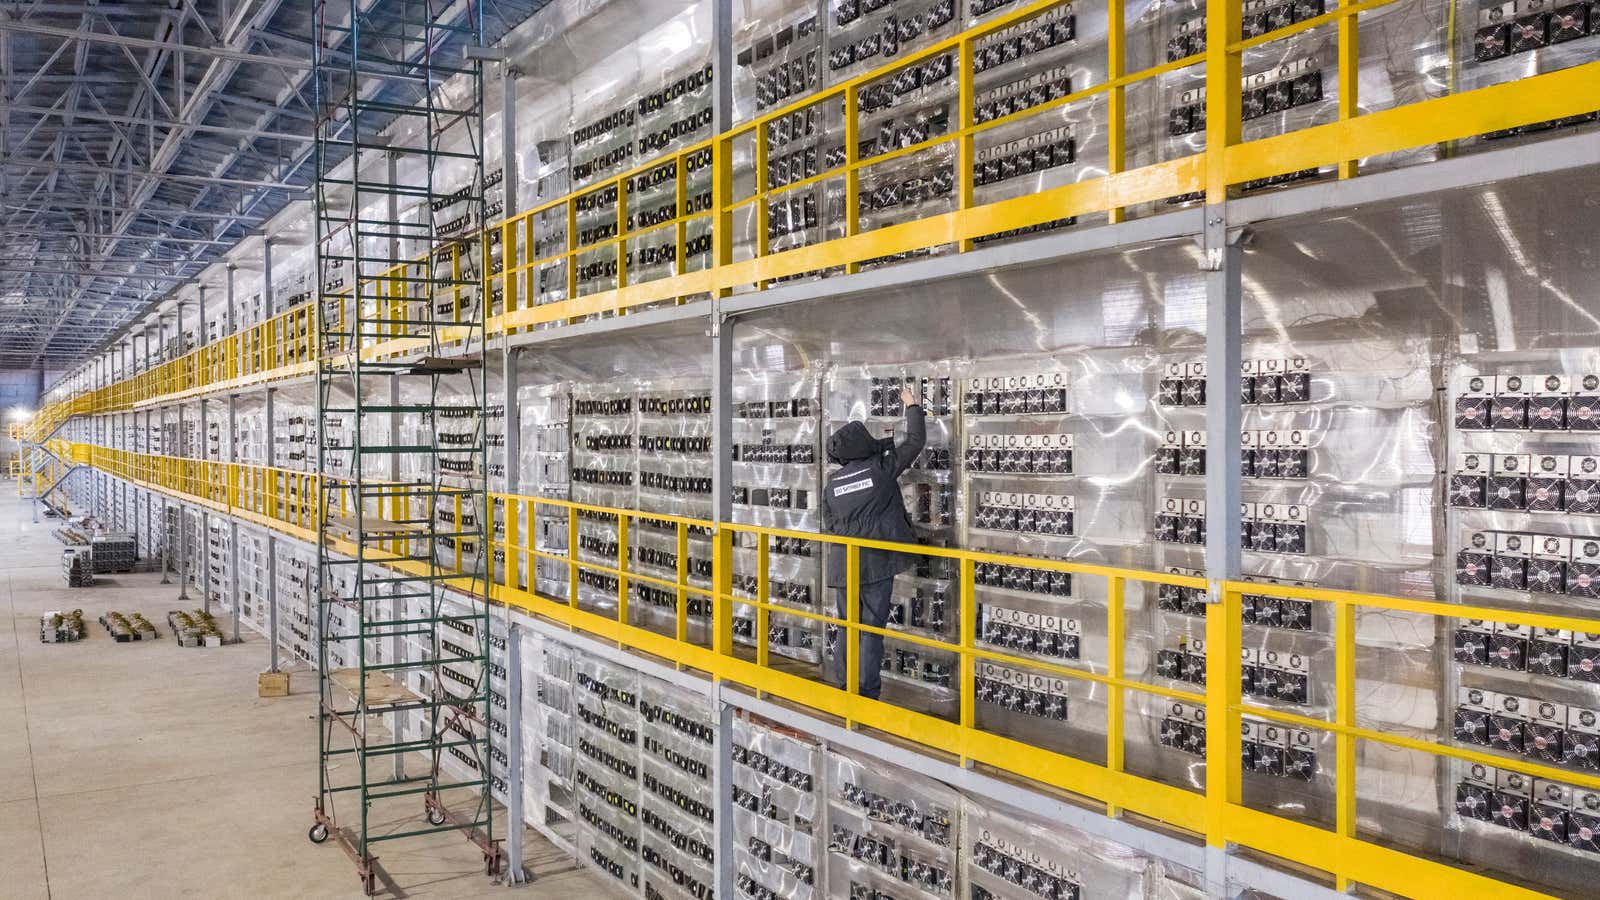 A cryptocurrency “mine” in Russia. Such operations are designed to reward energy waste.